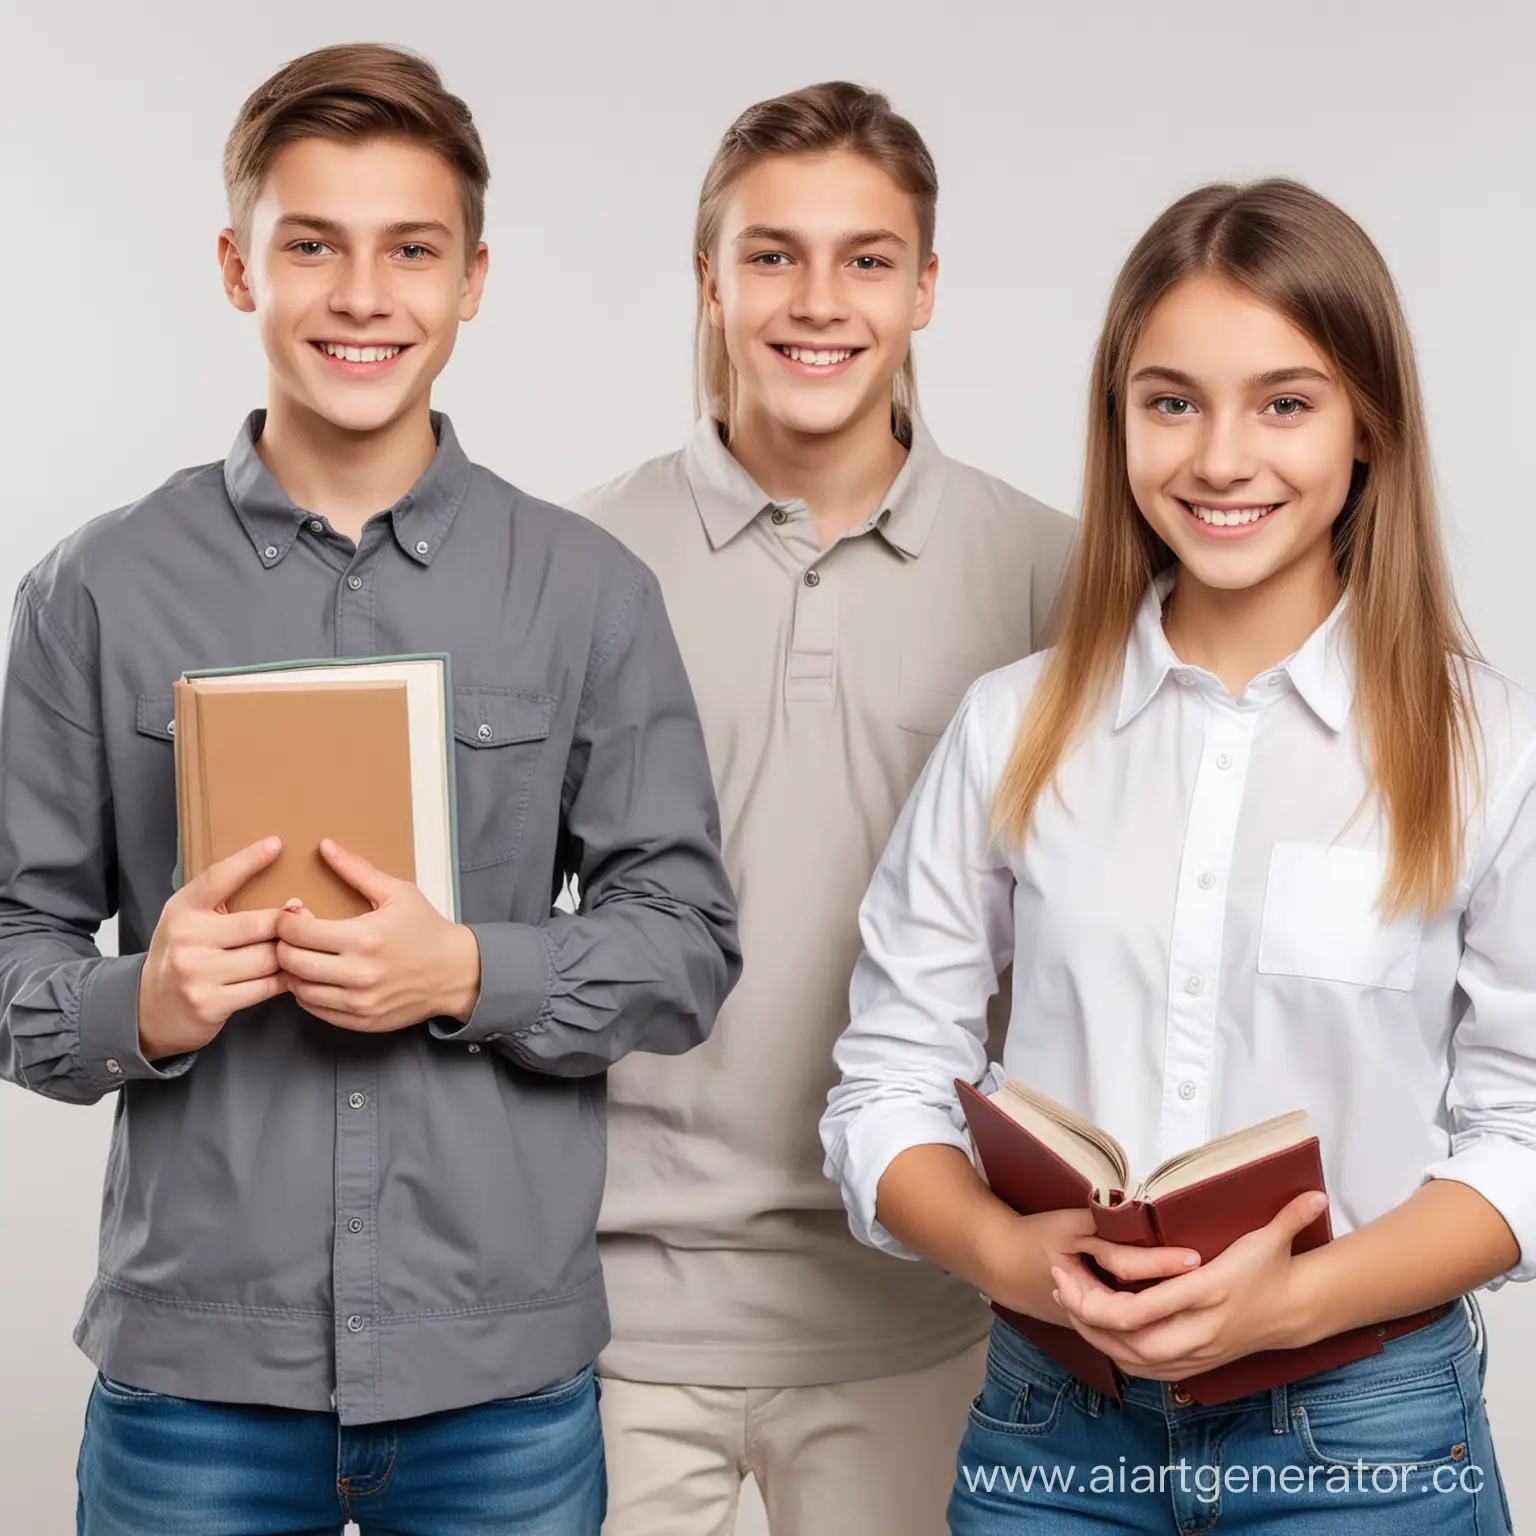 Smiling-Slavic-Teenagers-Holding-Books-in-Smart-Casual-Attire